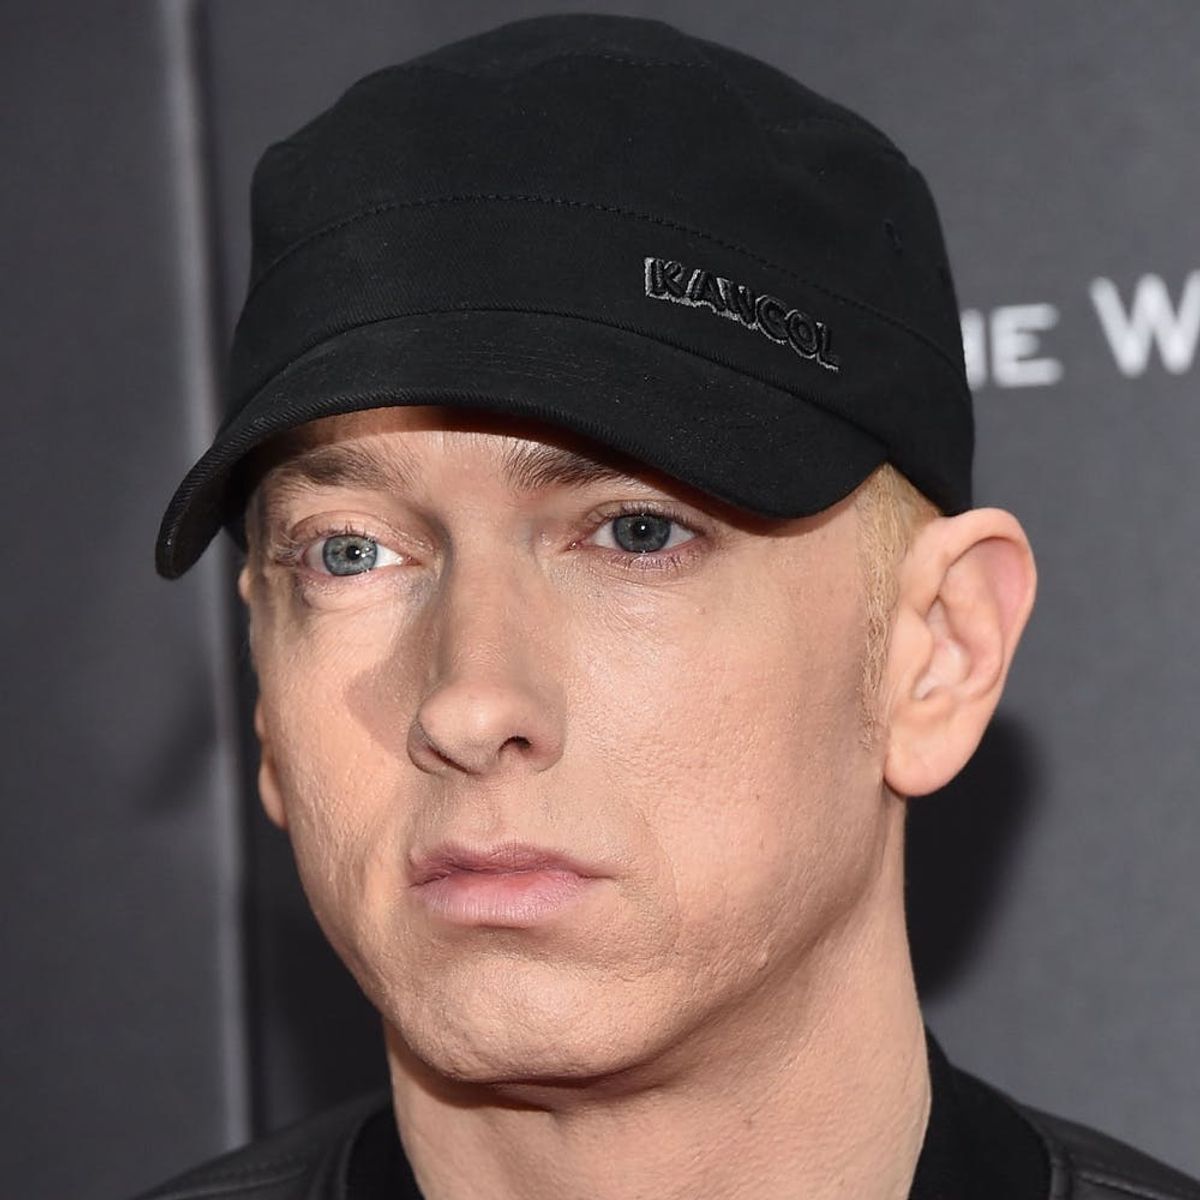 Eminem Is Selling “Mom’s Spaghetti” at His New Pop-Up Shop